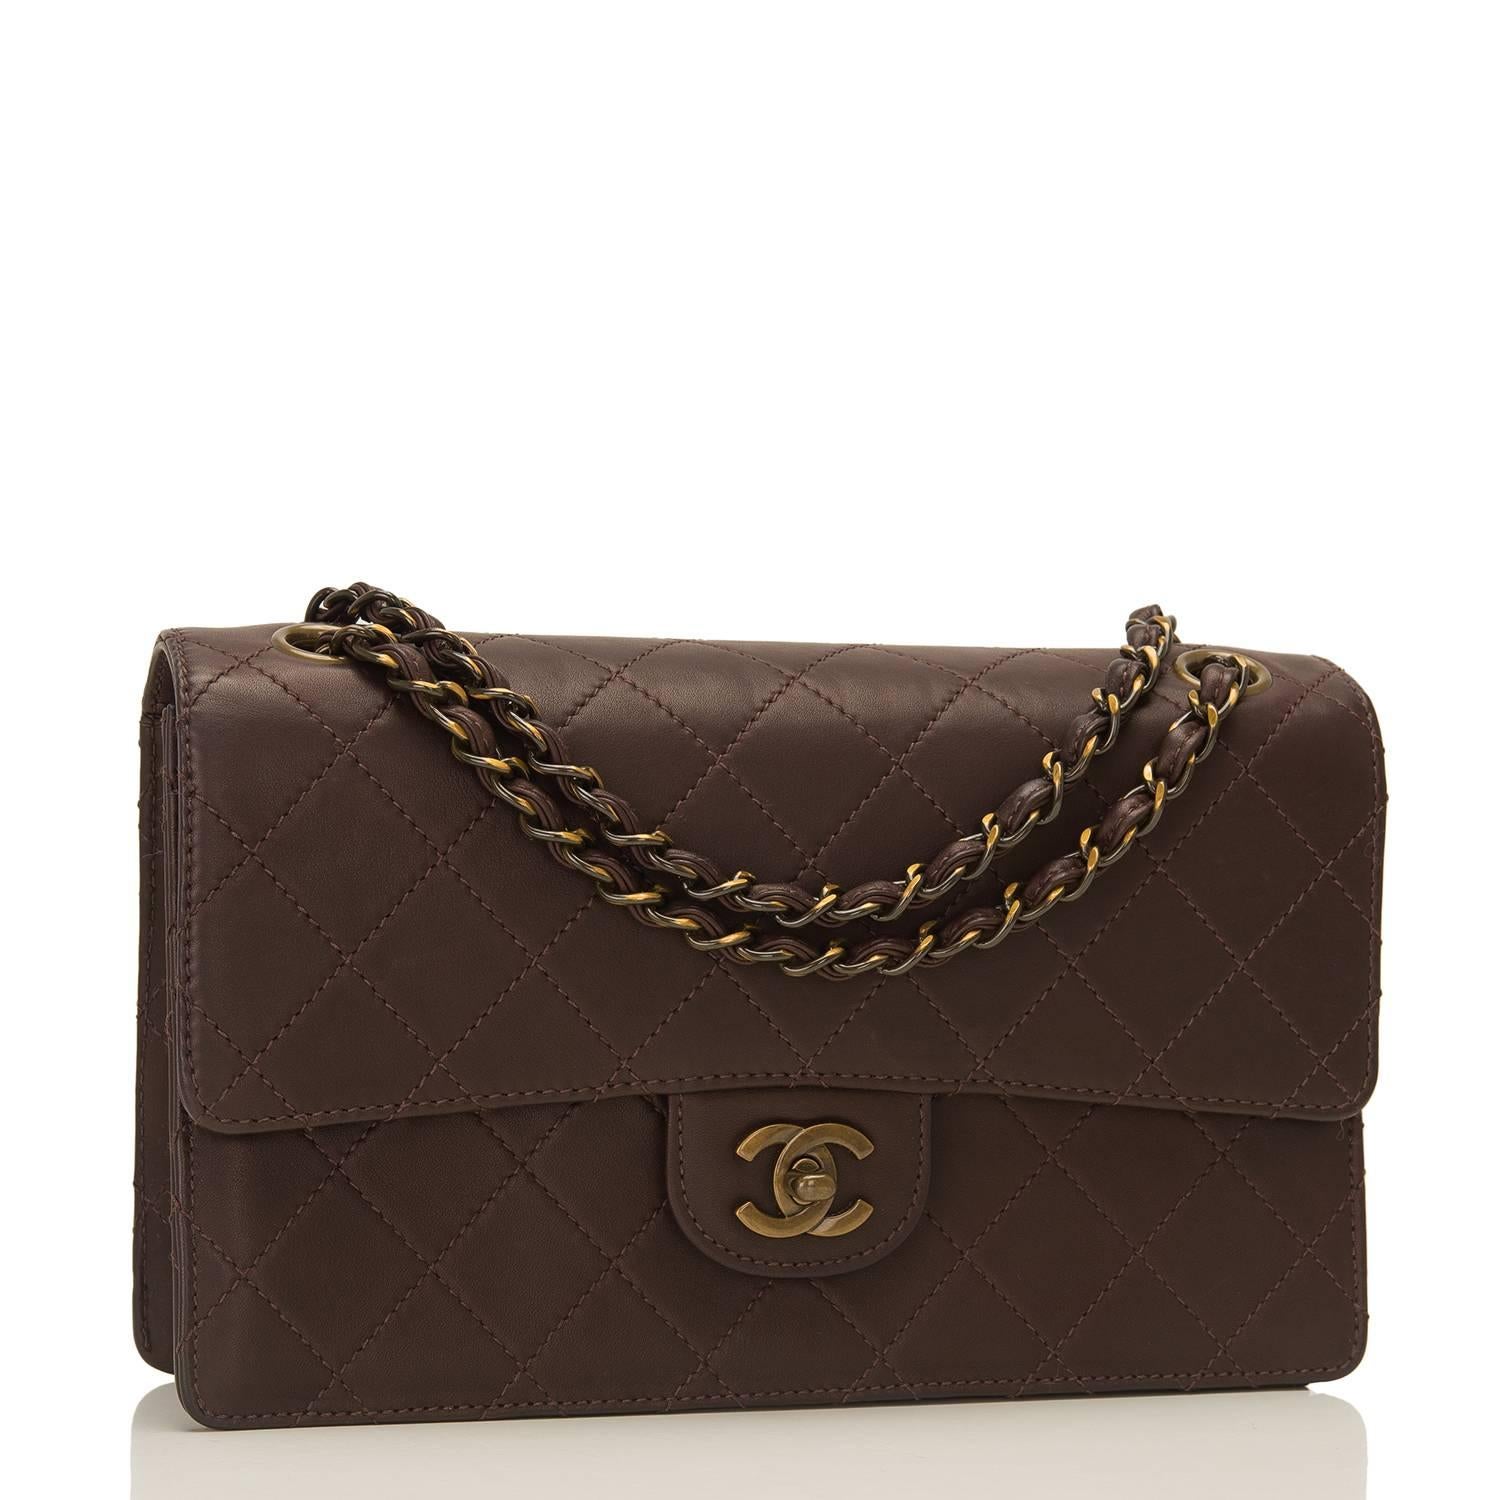 Chanel limited edition single flap bag of dark brown lambskin leather with dark gold "enameled" hardware.

This bag in the classic Medium size features a front flap with dark gold signature CC turnlock closure, tonal stitching, a half